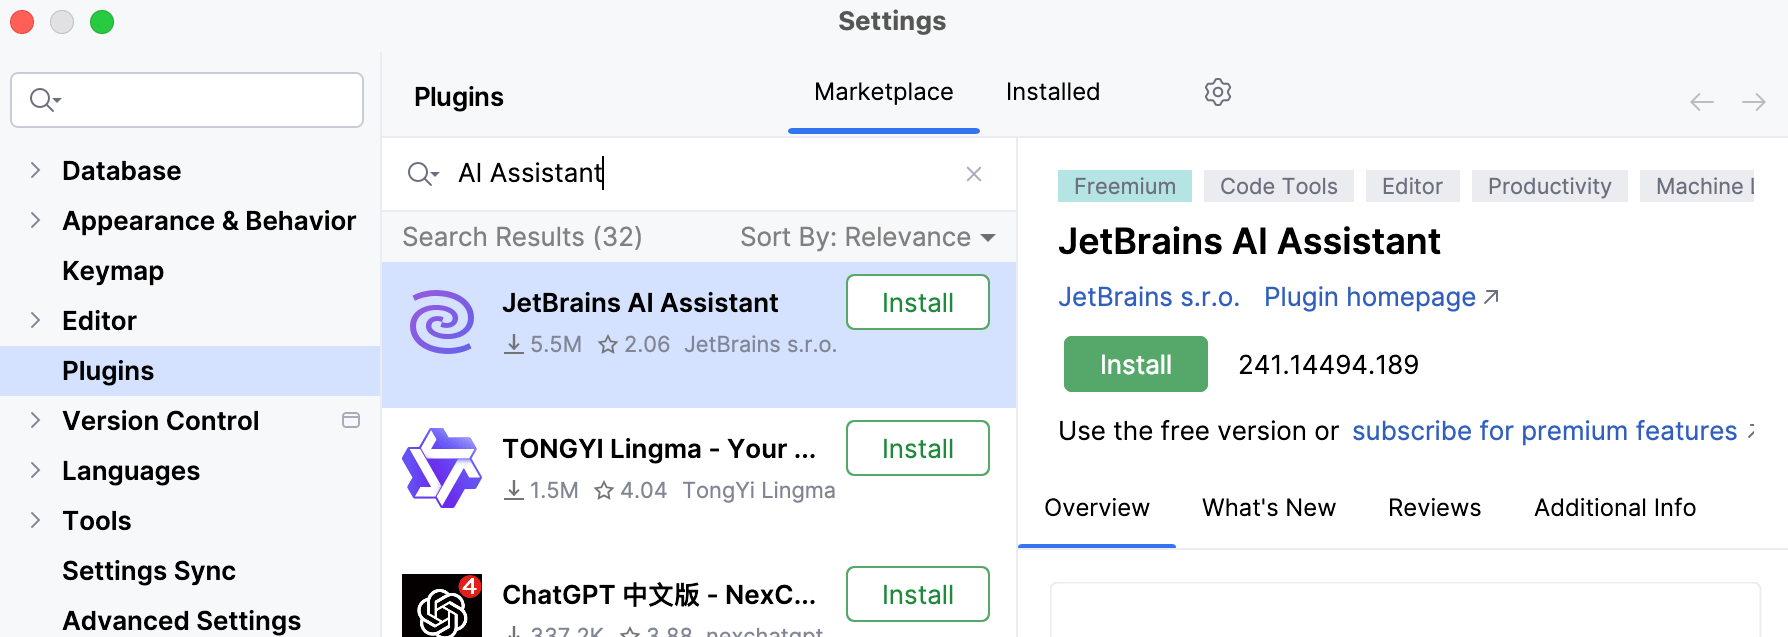 AI Assistant in the list of available plugins in the marketplace